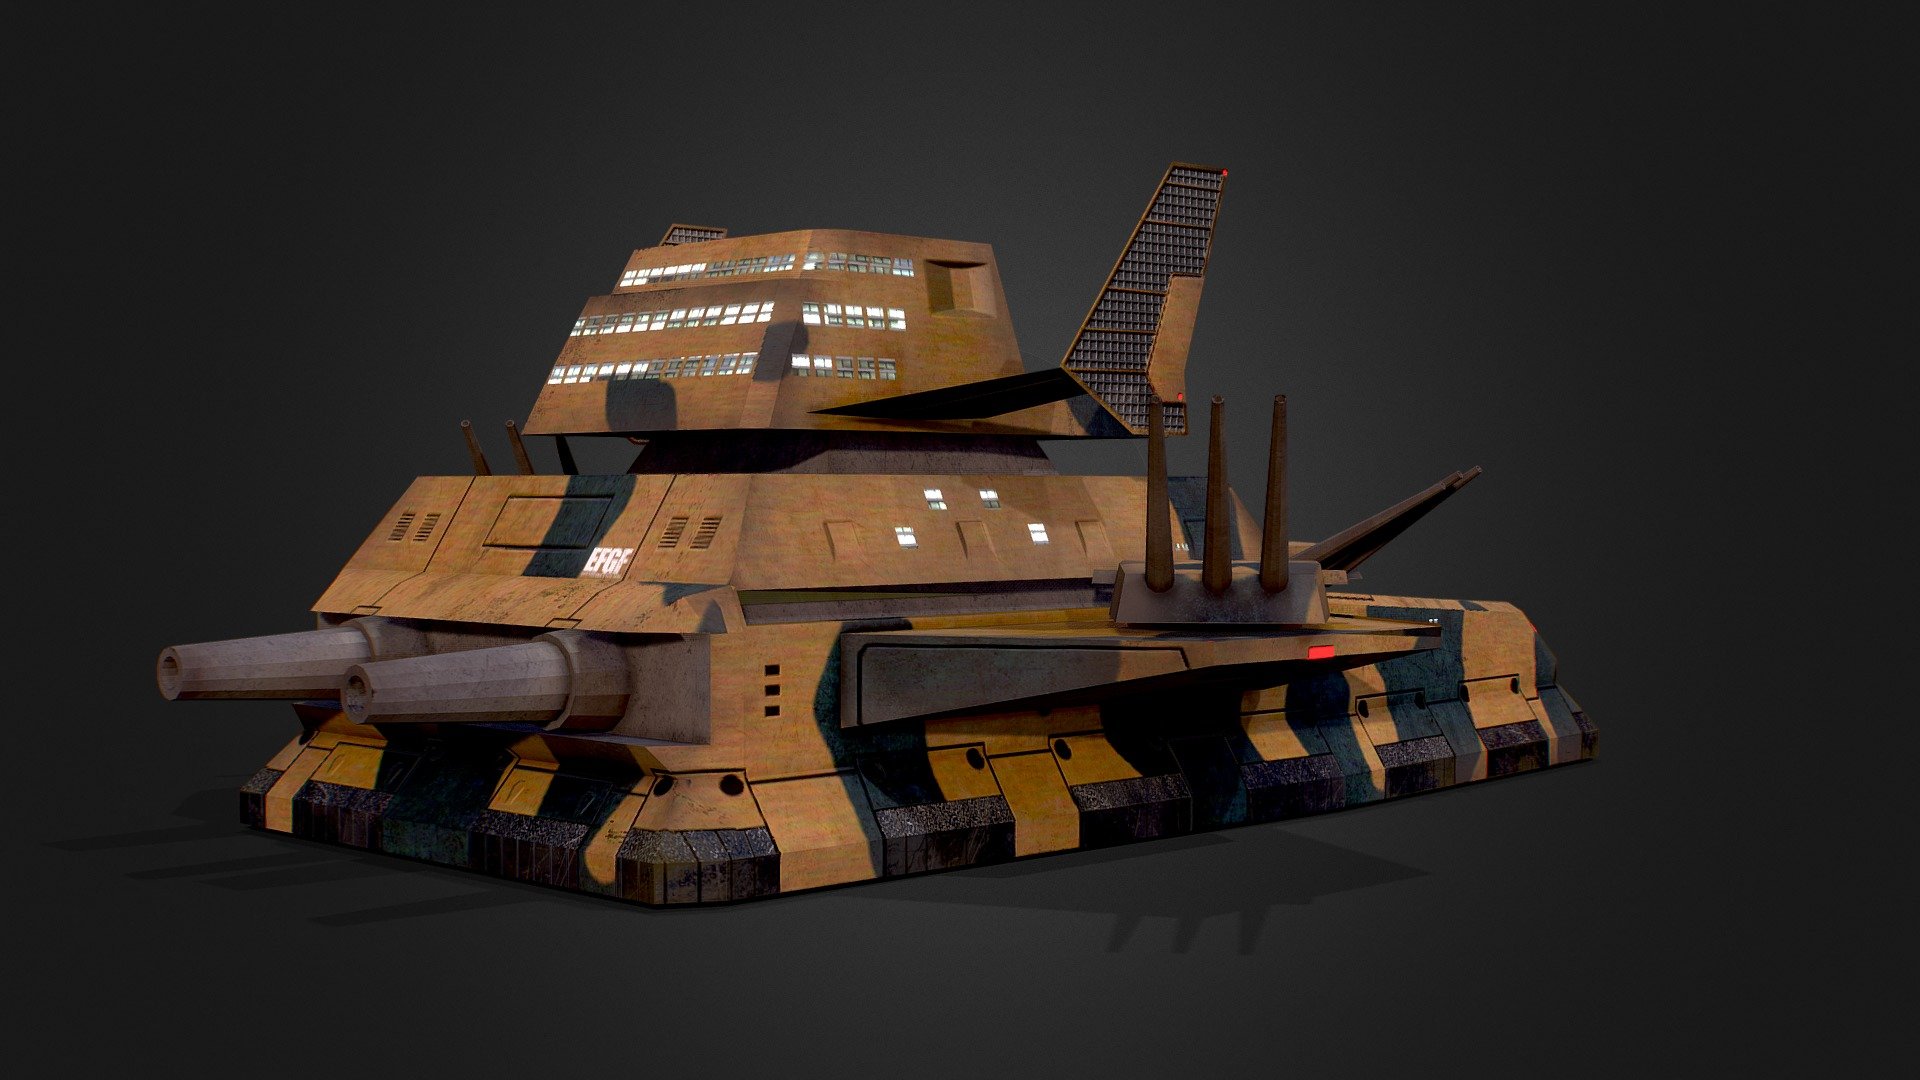 This model was made for One Year War mod of Hearts of Iron IV.

Our Mod Steam Home Page

https://steamcommunity.com/sharedfiles/filedetails/?id=2064985570 - EFF Land Battleship Big Tray - 3D model by One Year War Mod (@hoi4oneyearwar) 3d model